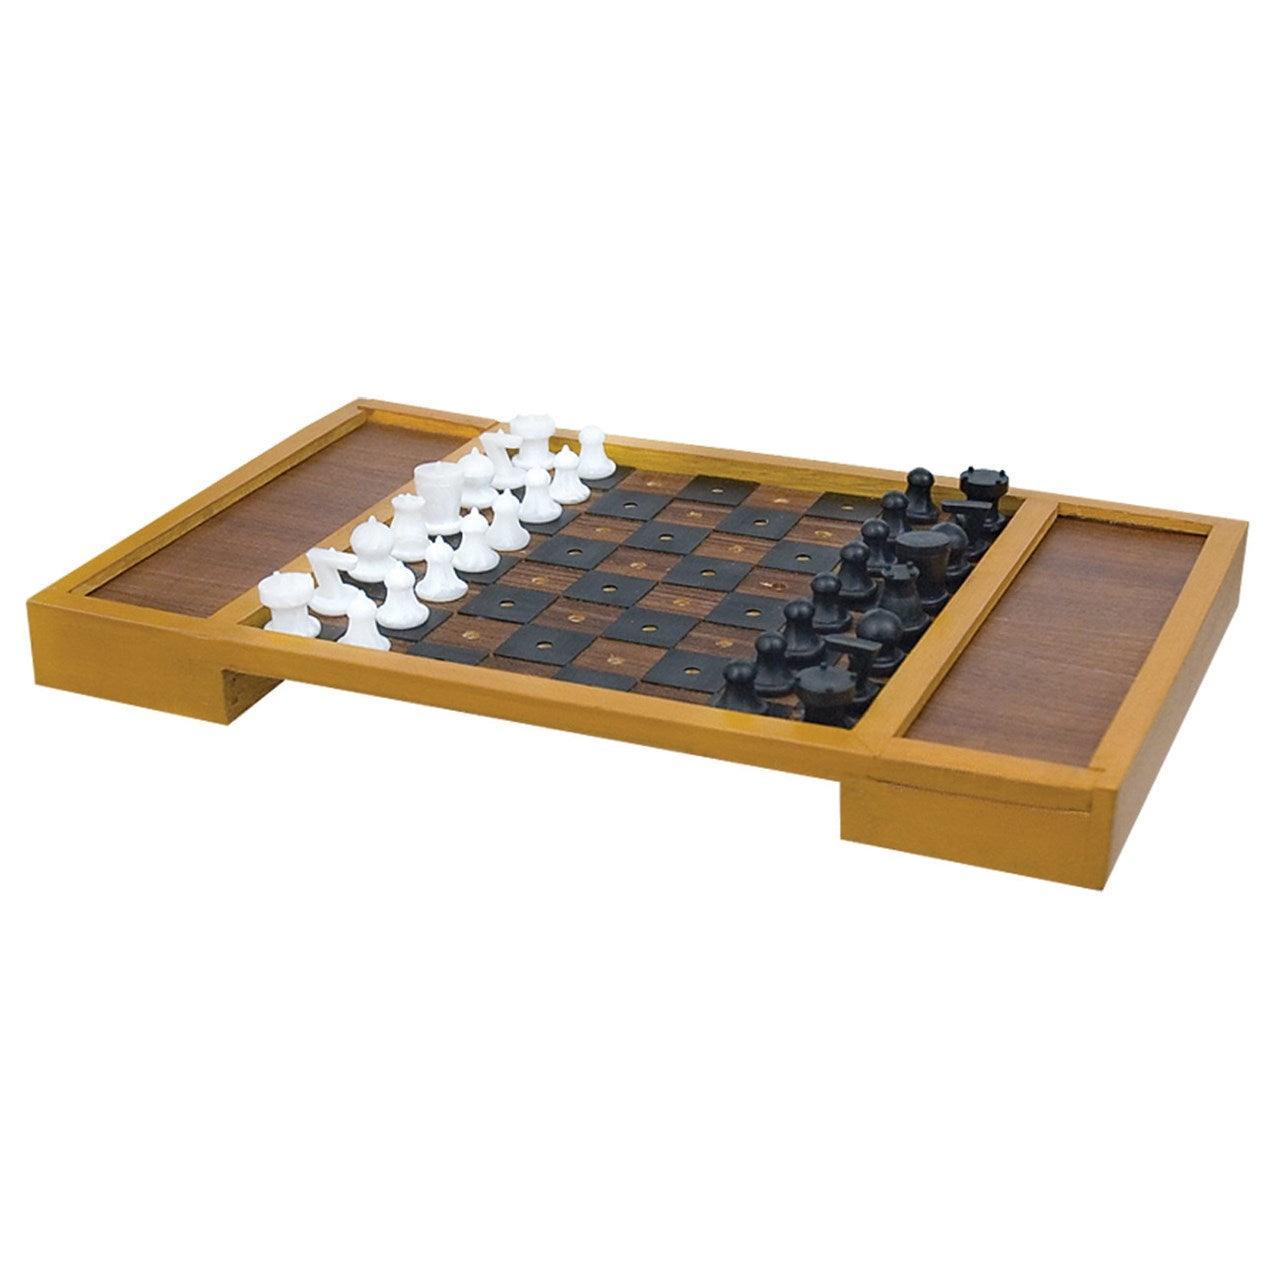 Chess Set | Tactile Chess Board - The Low Vision Store